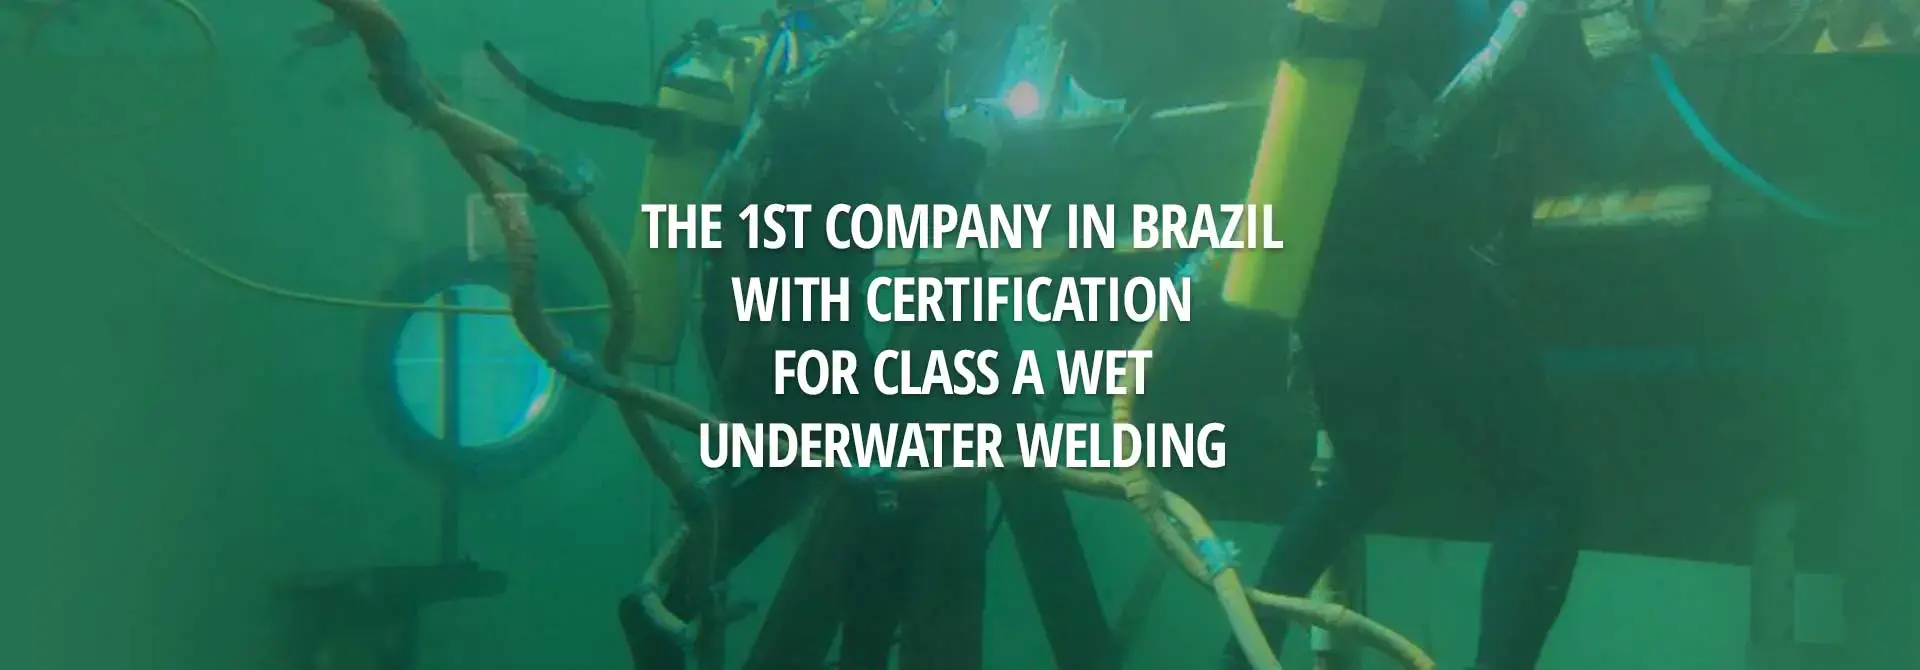 DIVING SERVICES - The 1st Company In Brazil With Certification For Class A Wet Underwater Welding 